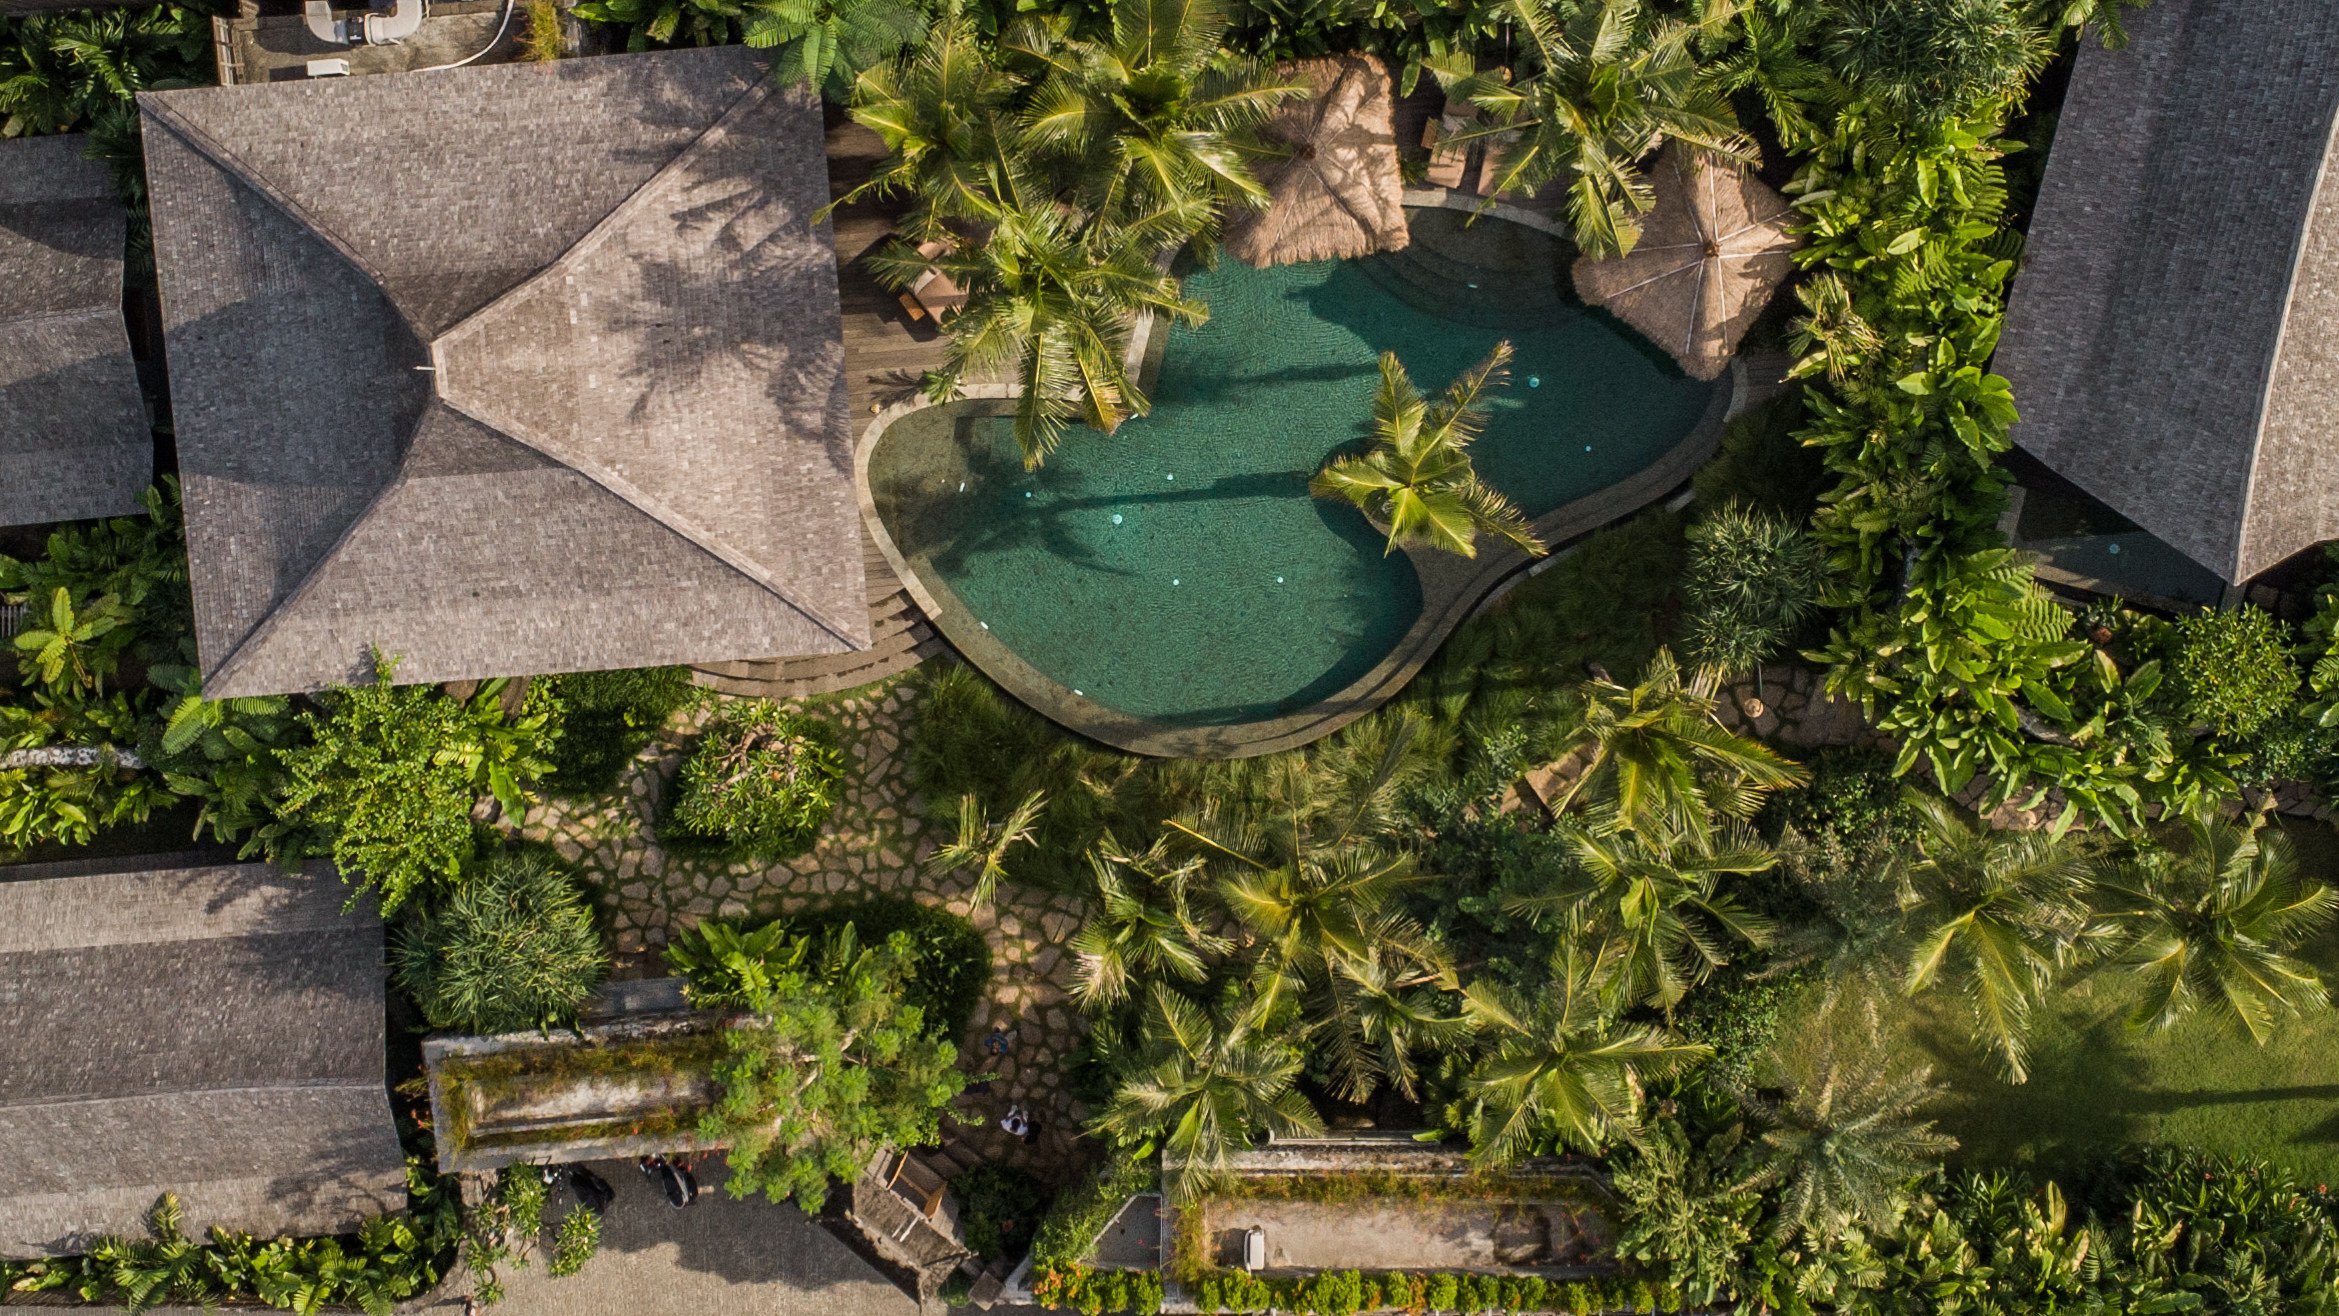 Desa Hay, a solar-powered eco-resort in Bali, offers a tranquil escape with a focus on sustainability. Photos: Handout